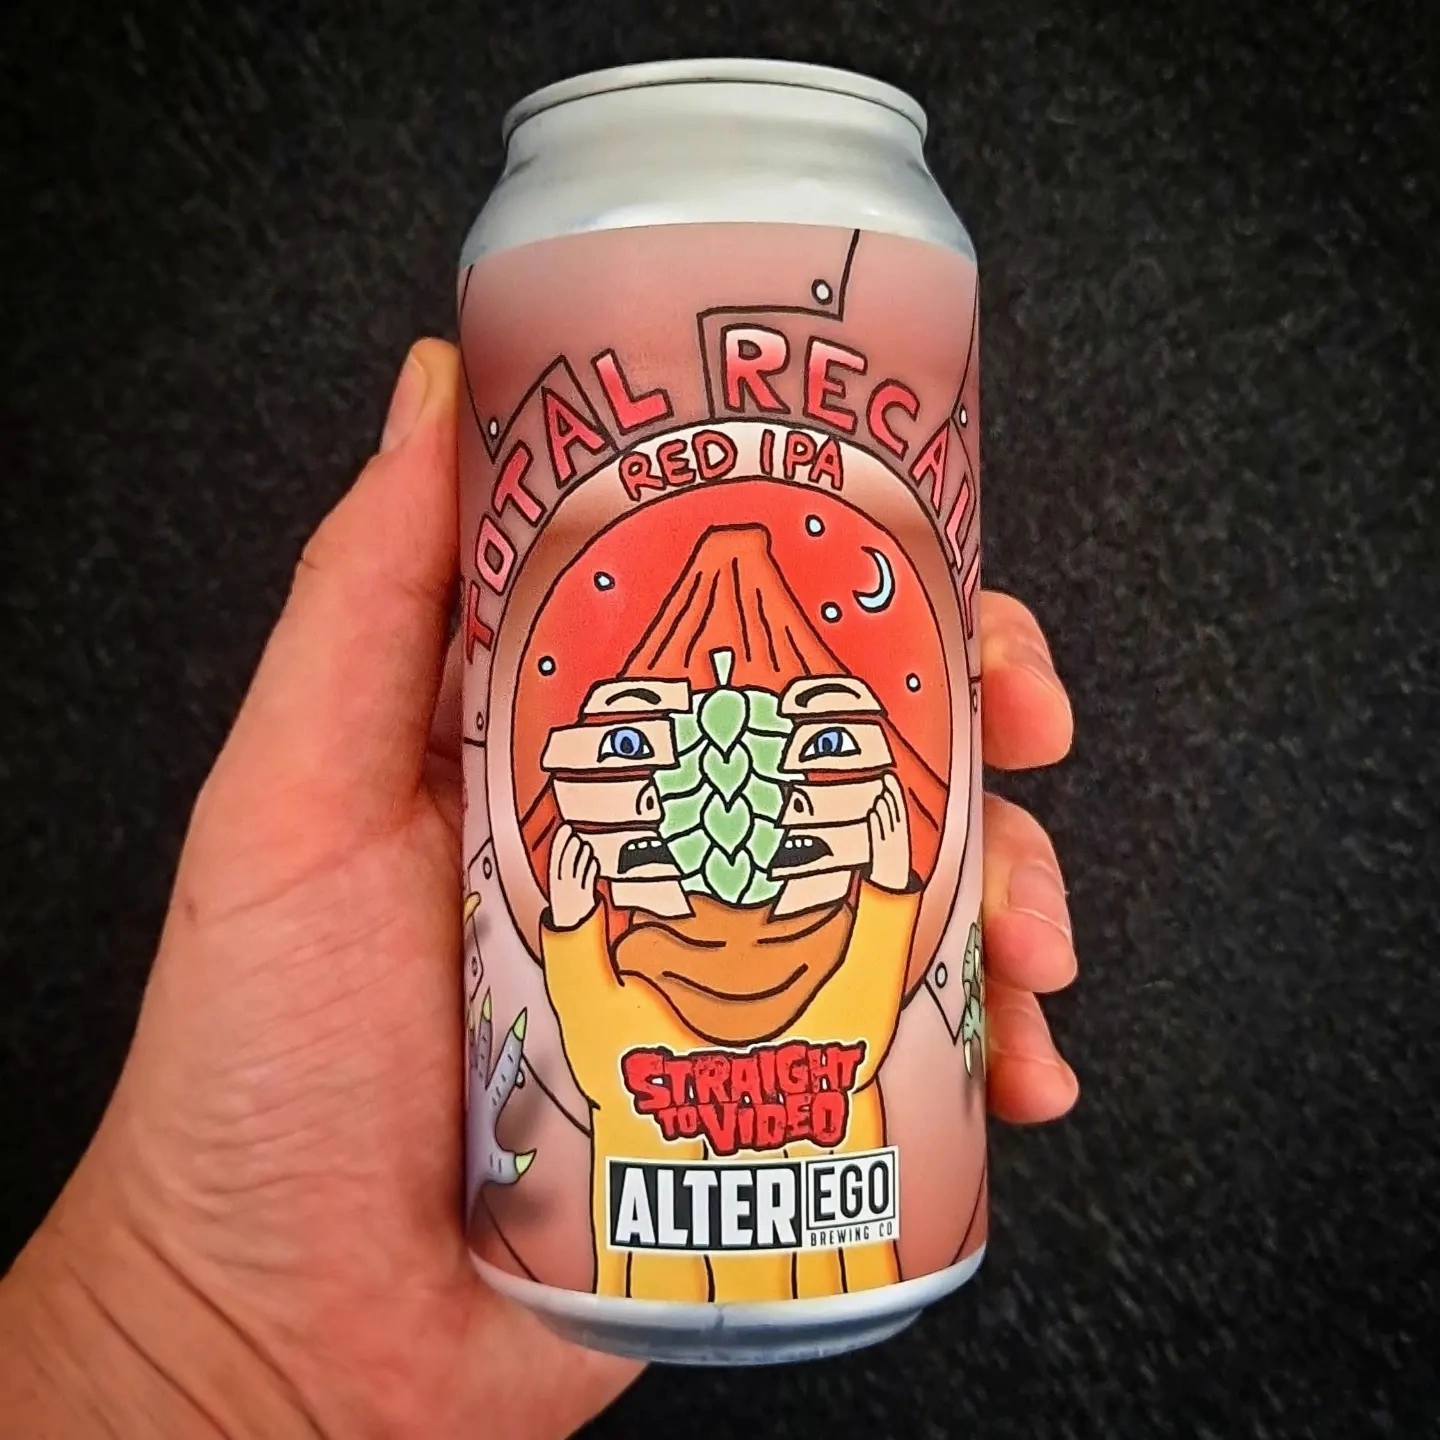 Straight To Video - 80s Video Shop and Alter Ego Brewing Co have teamed up to create a beer together